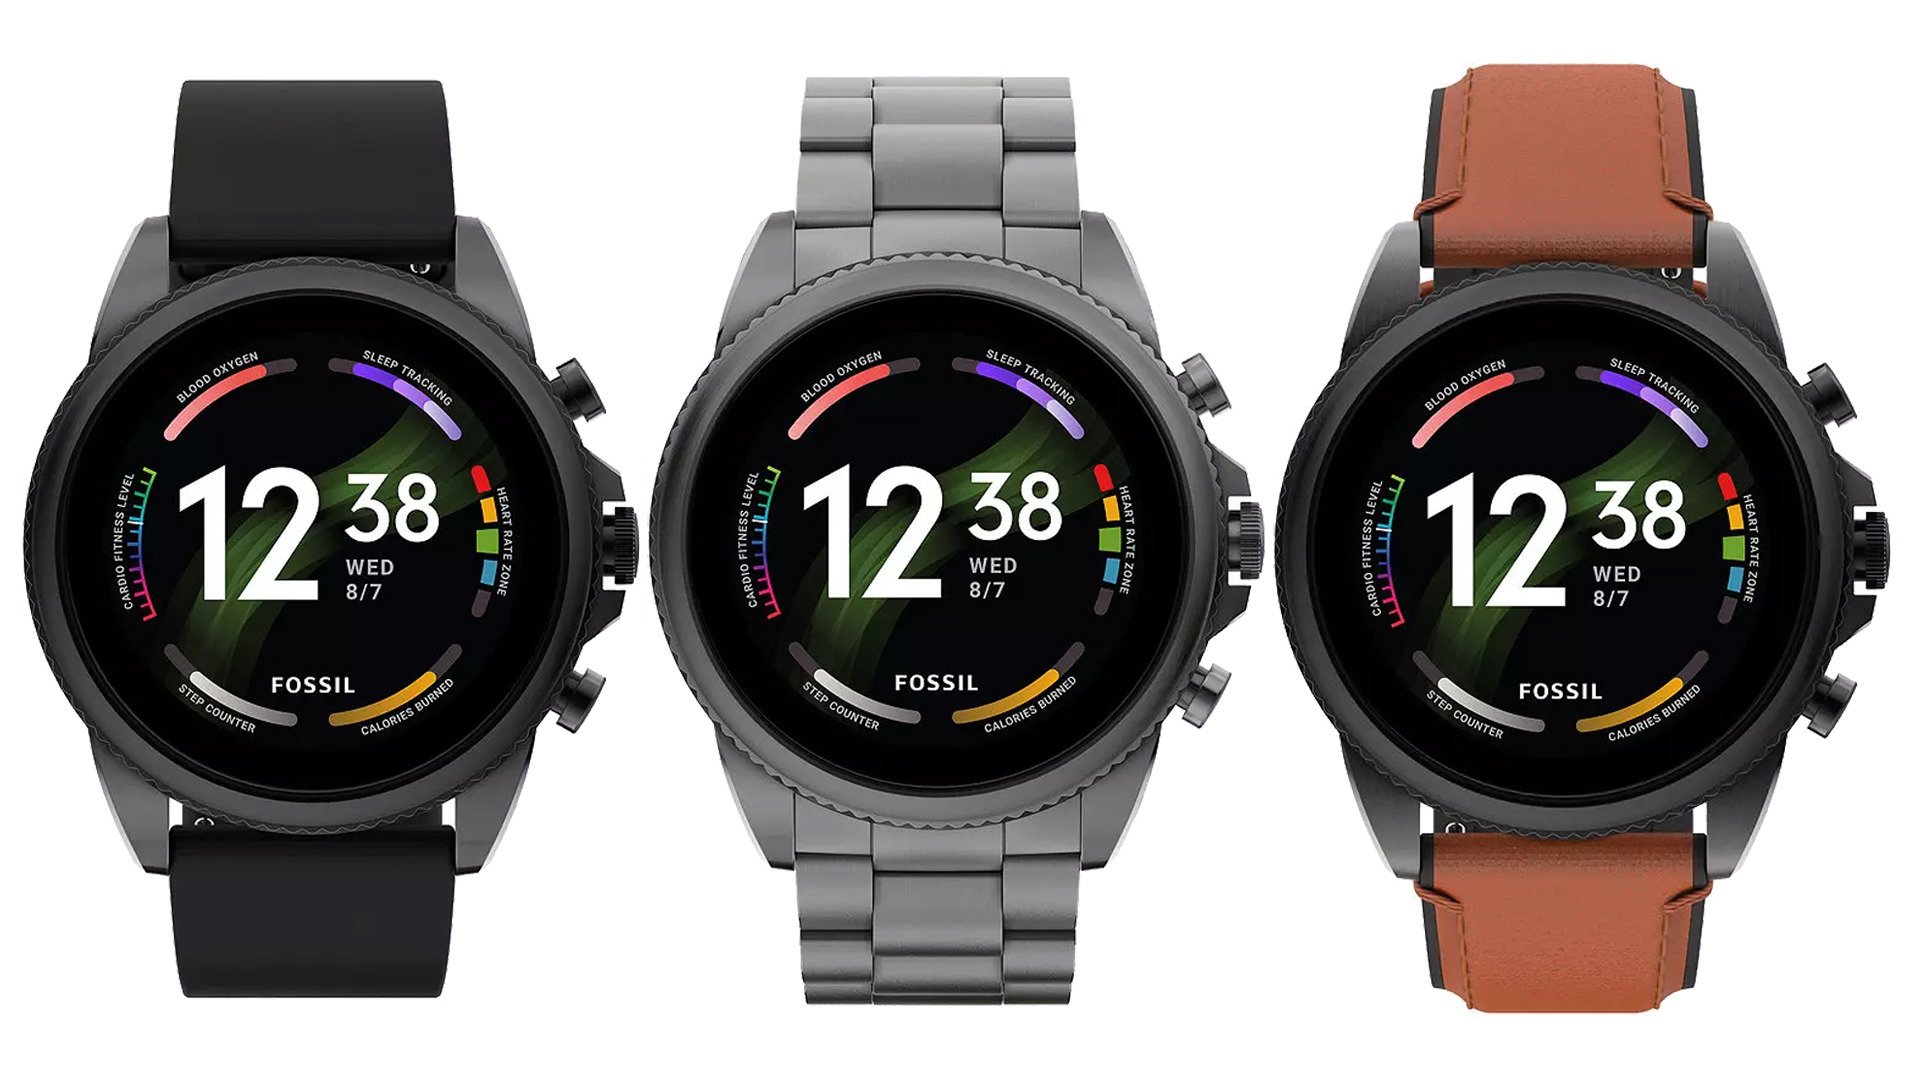 Here's our first look at the Fossil Gen 6 smartwatch running Wear OS 3